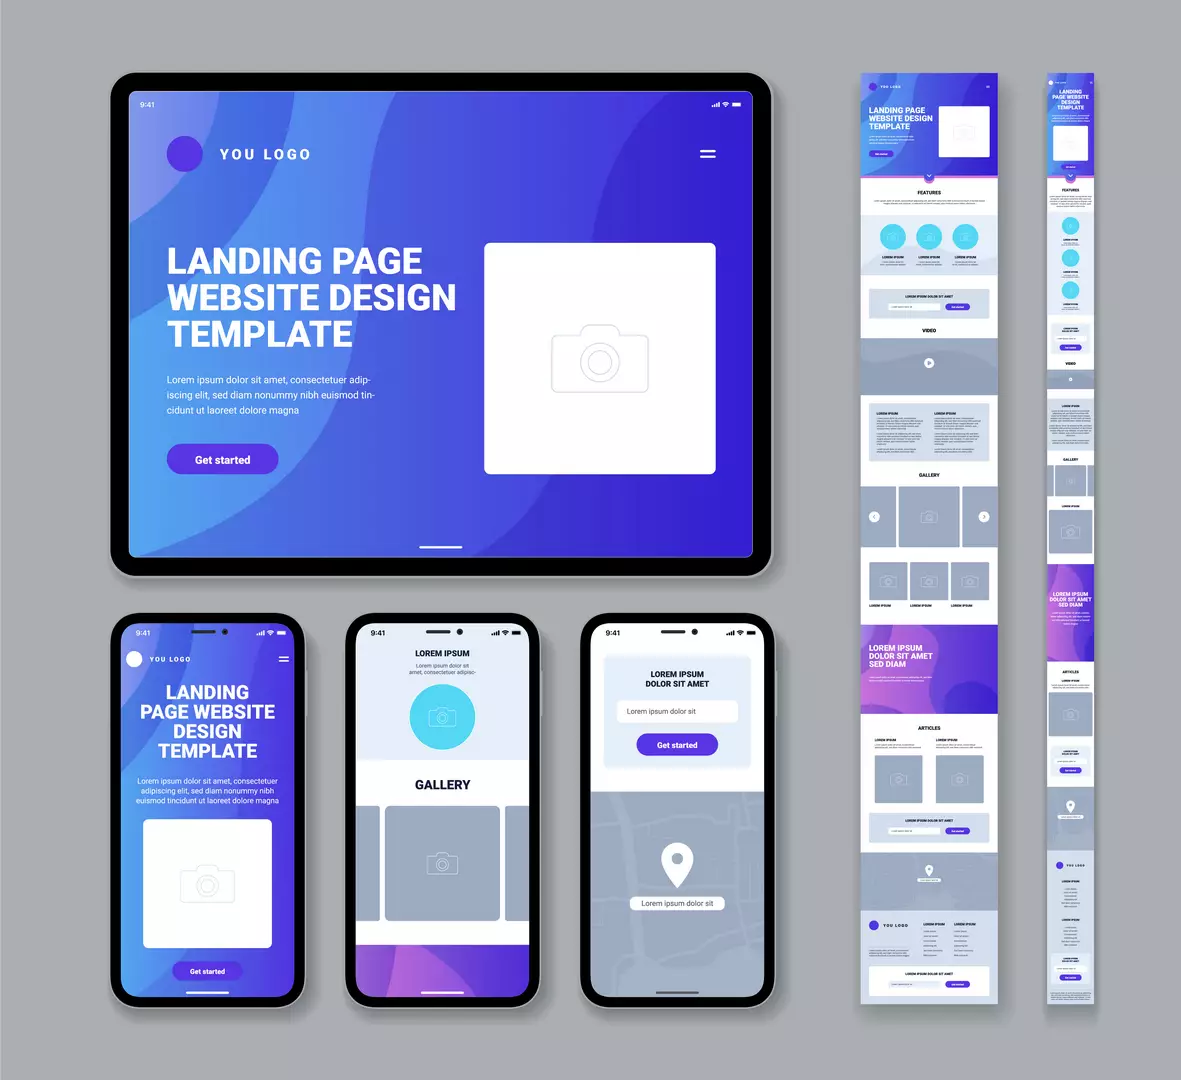 Landing page efficace